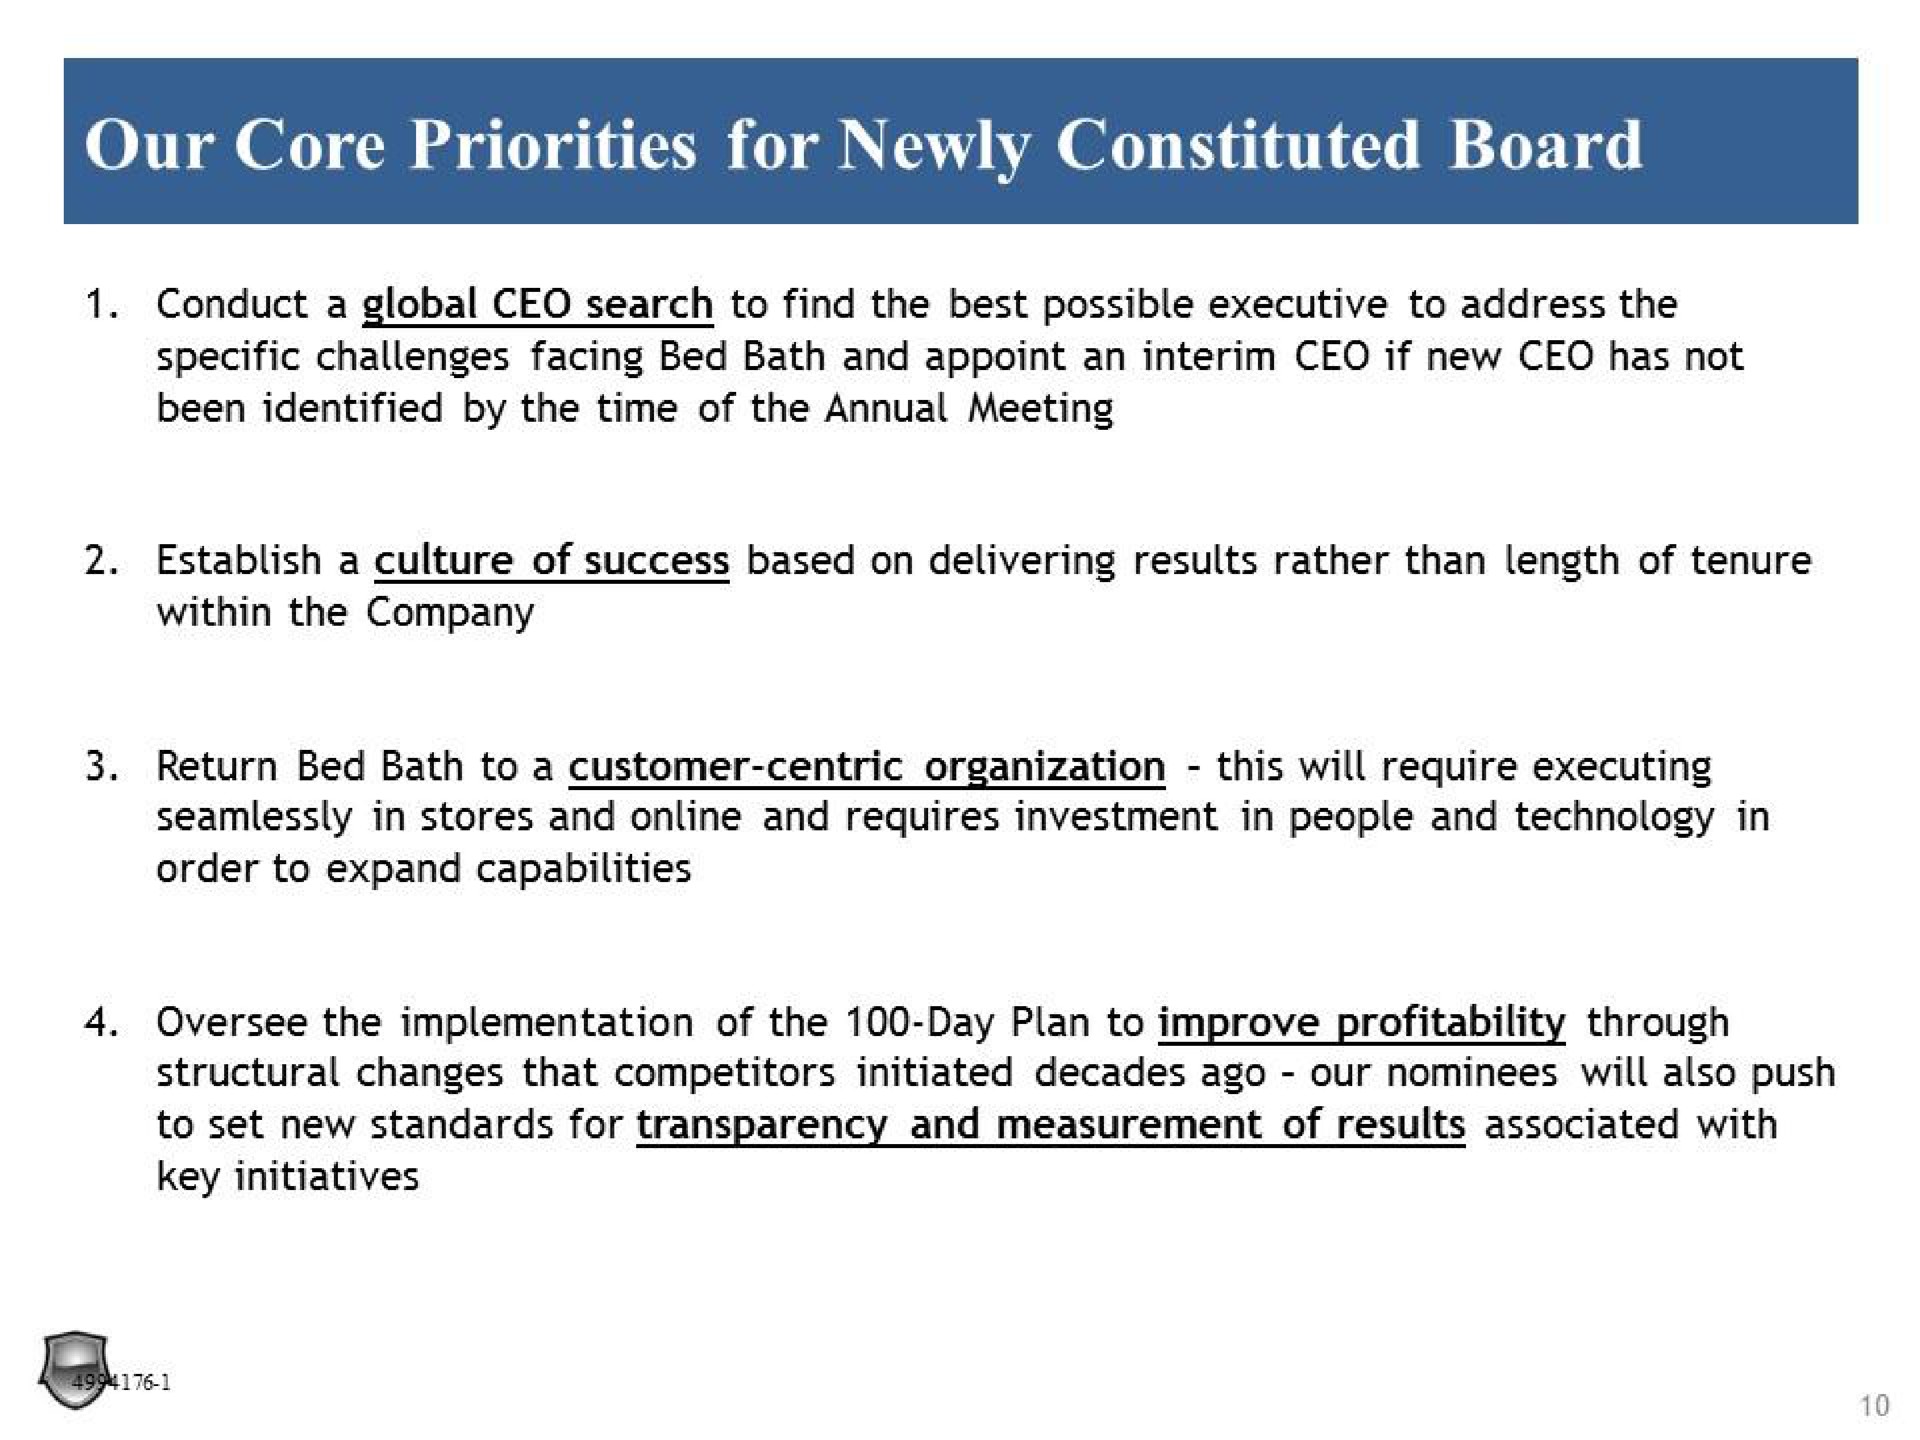 our core priorities for newly constituted board | Legion Partners